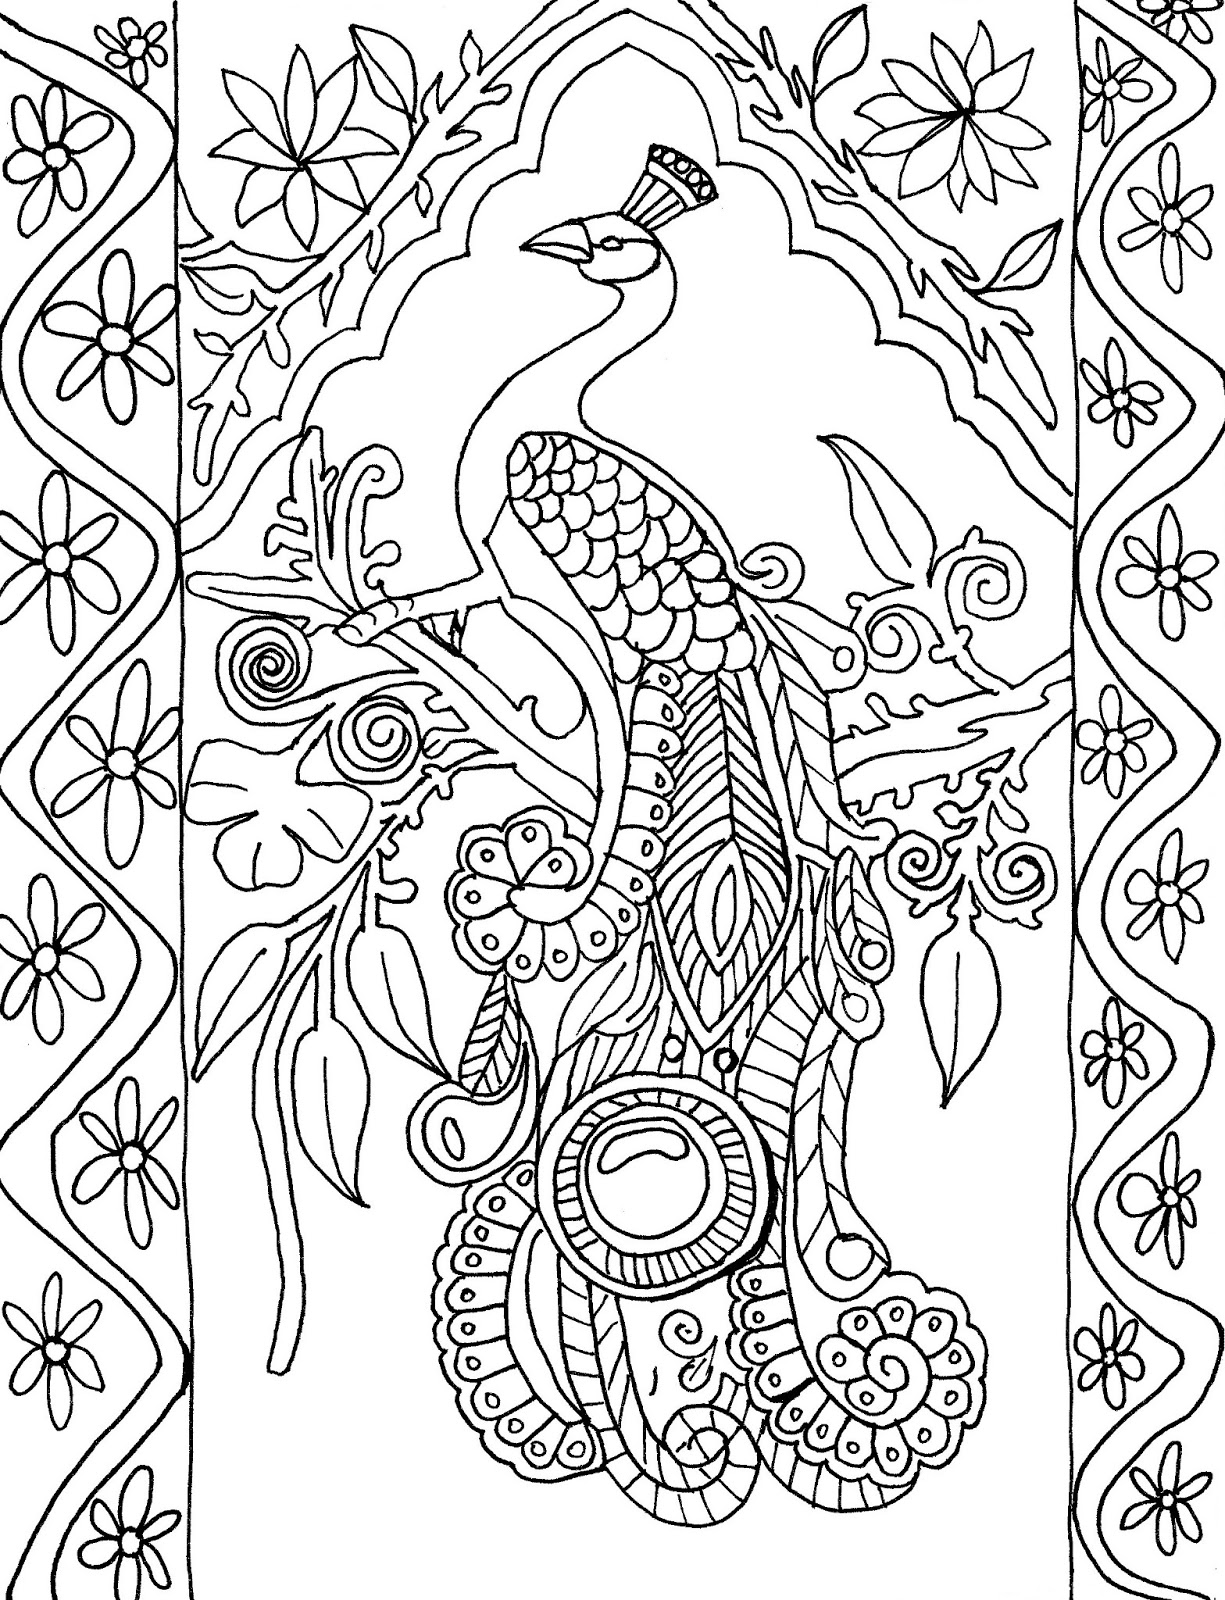 7-best-images-of-free-printable-adult-coloring-pages-feather-peacock